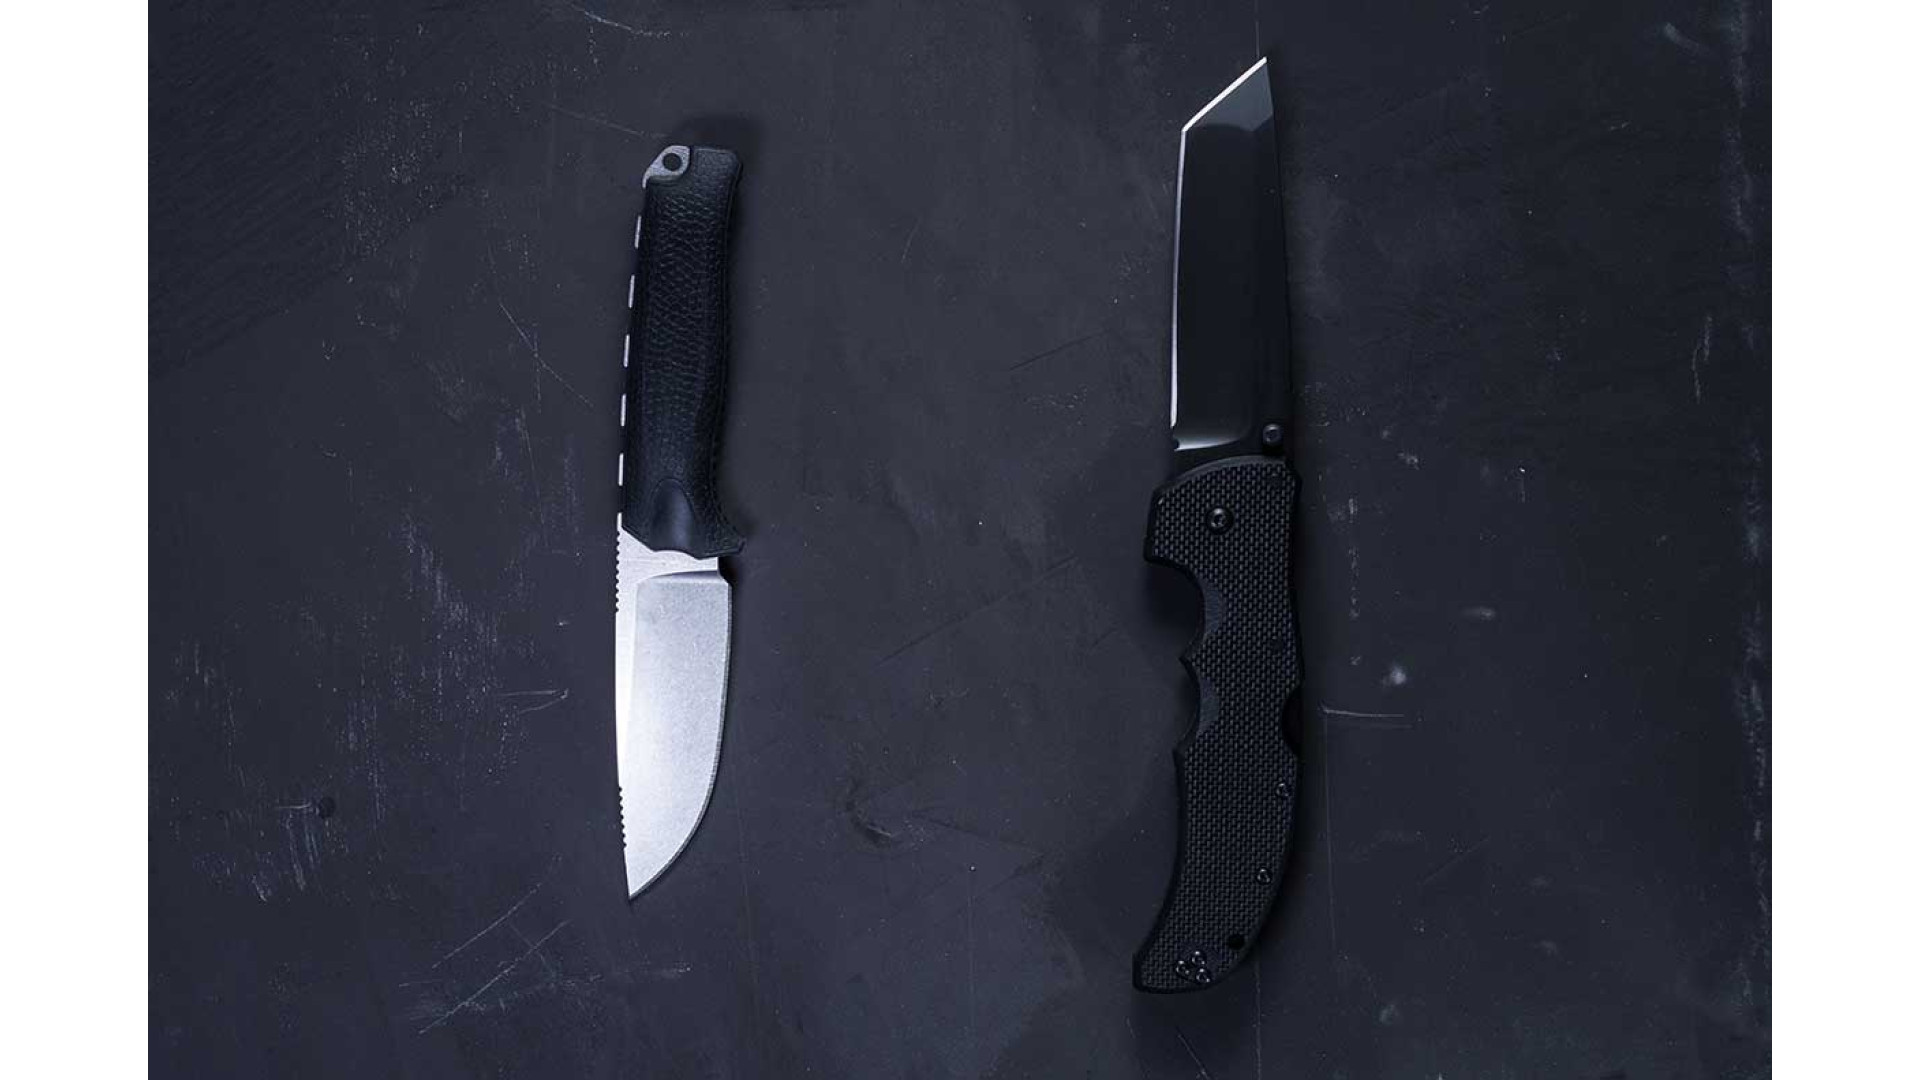 https://www.ckbproducts.com/image/cache/catalog/fixed-blade-and-folding-knives-compared-1920x1080.jpg